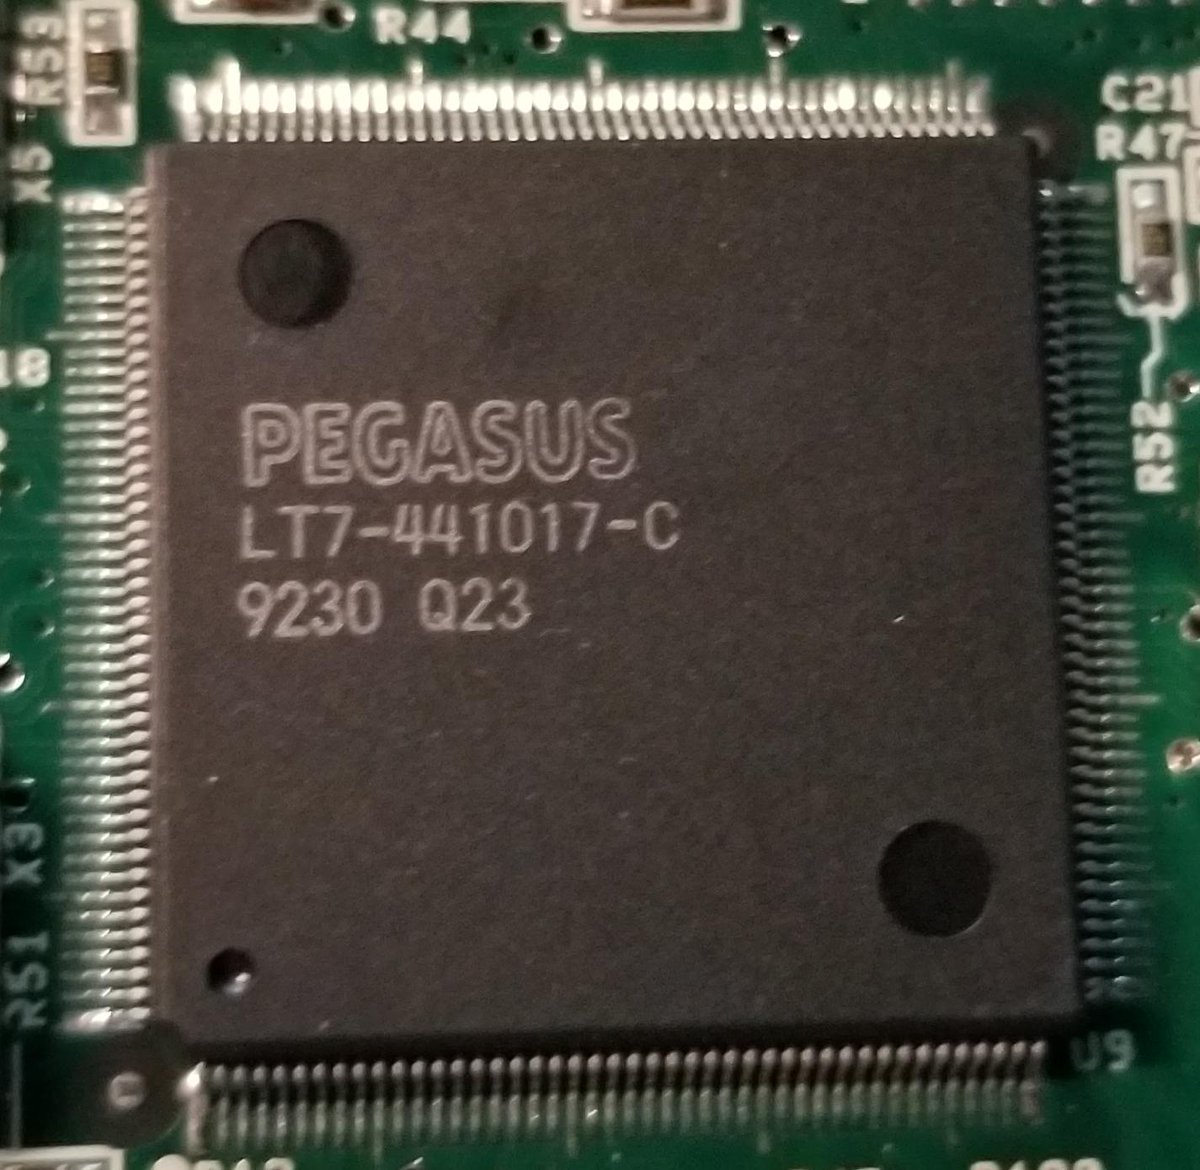 And this one is a Pegasus chip... Apparently Pegasus developed this device, so there's nothing online for this chip.